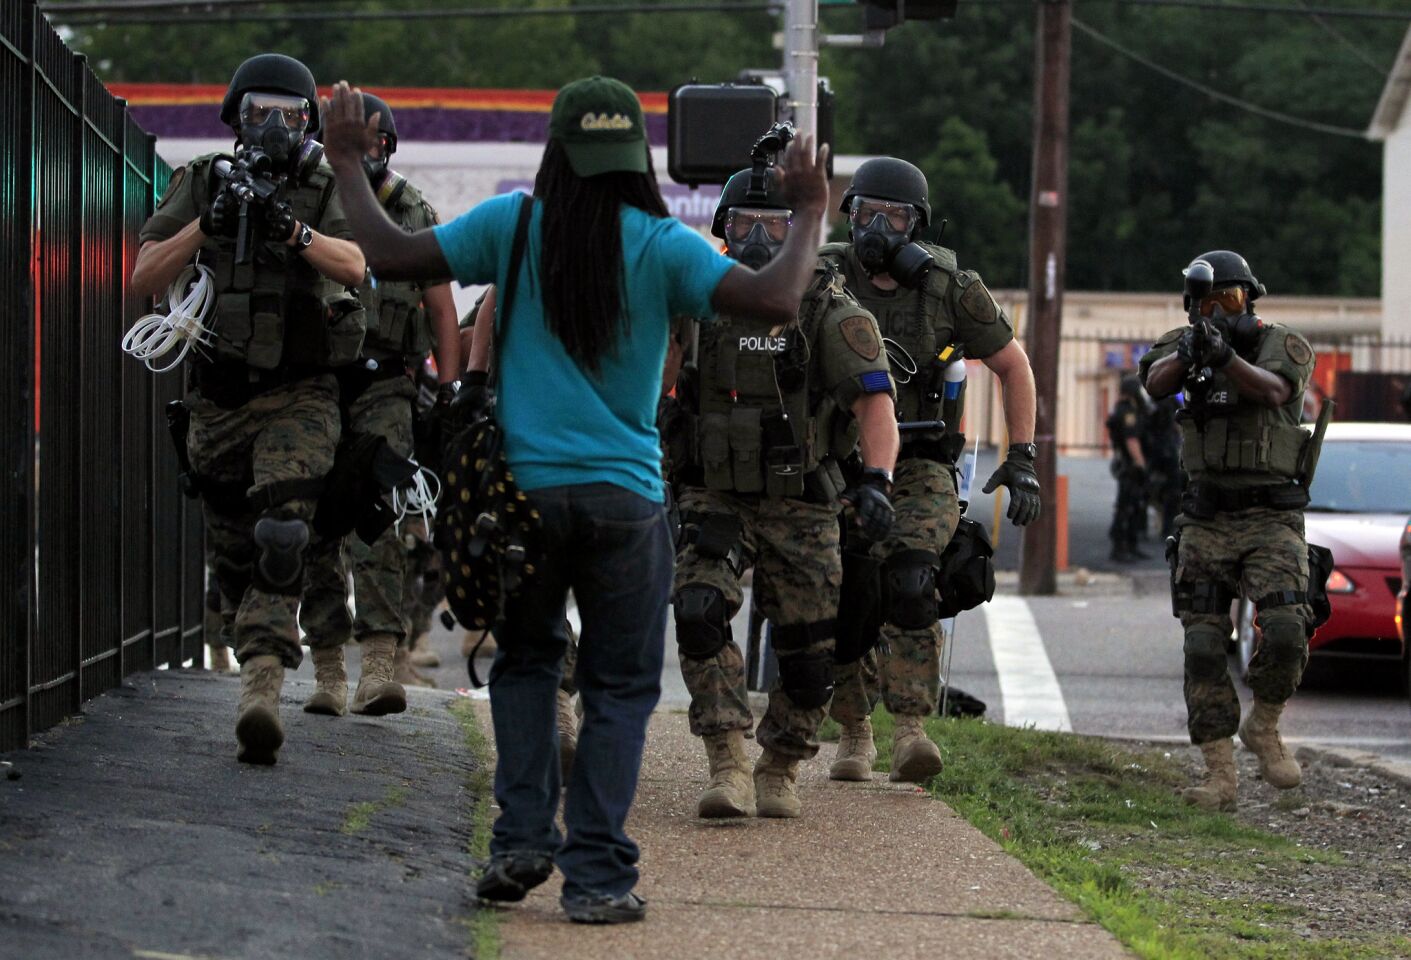 Police wearing riot gear walk toward a man with his hands raised in Ferguson, Mo. Authorities have made several arrests in Ferguson, where crowds have looted and burned stores, vandalized vehicles and taunted police after a vigil for an unarmed black man who was killed by police.